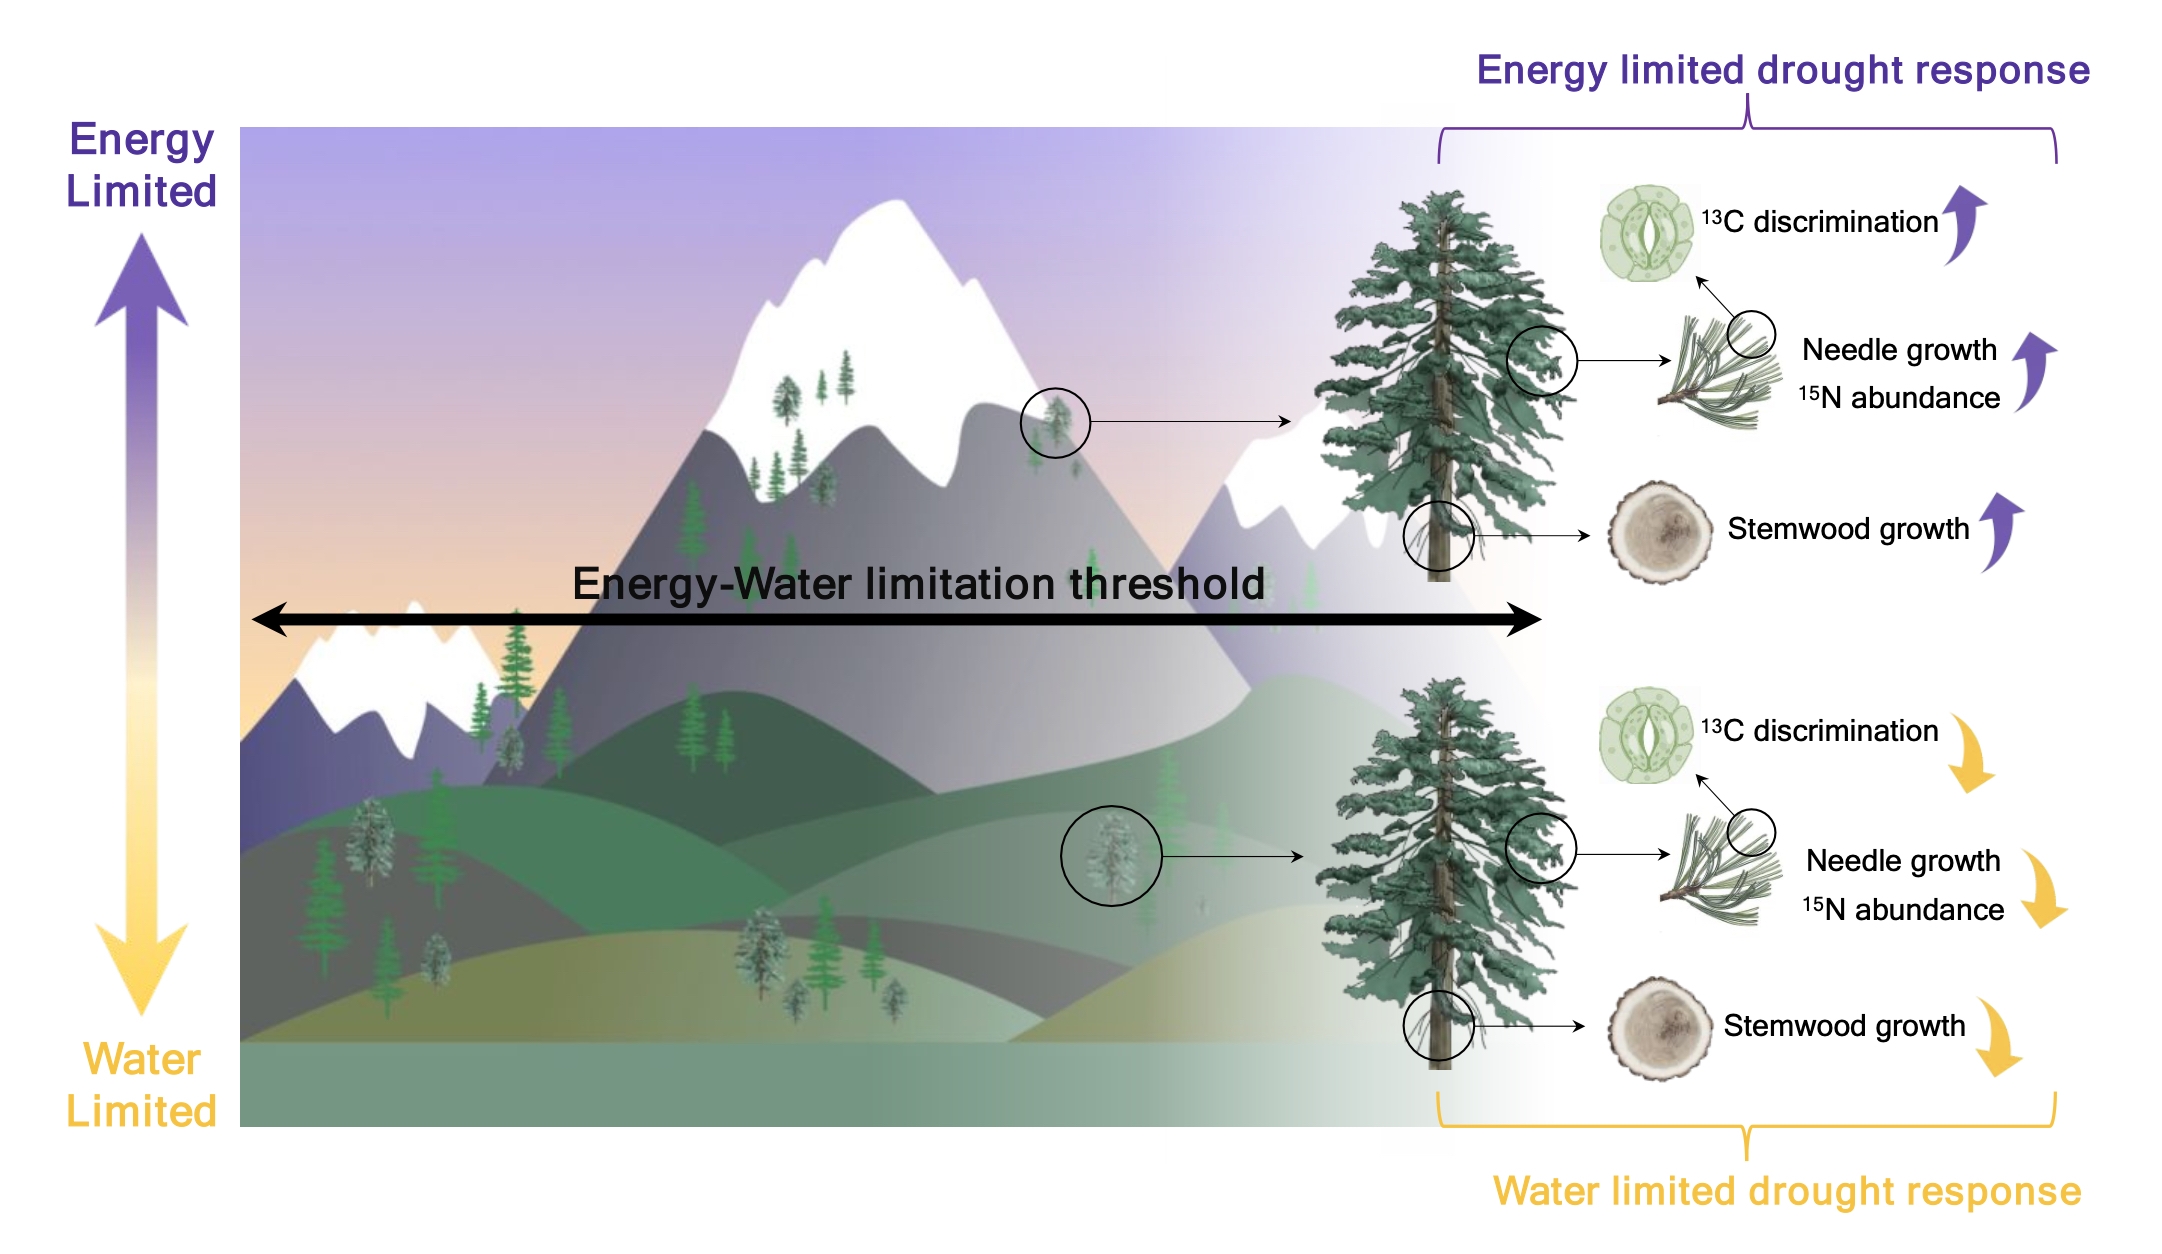 Trees in energy- and water-limited locations on a mountain have drastically different responses to drought.